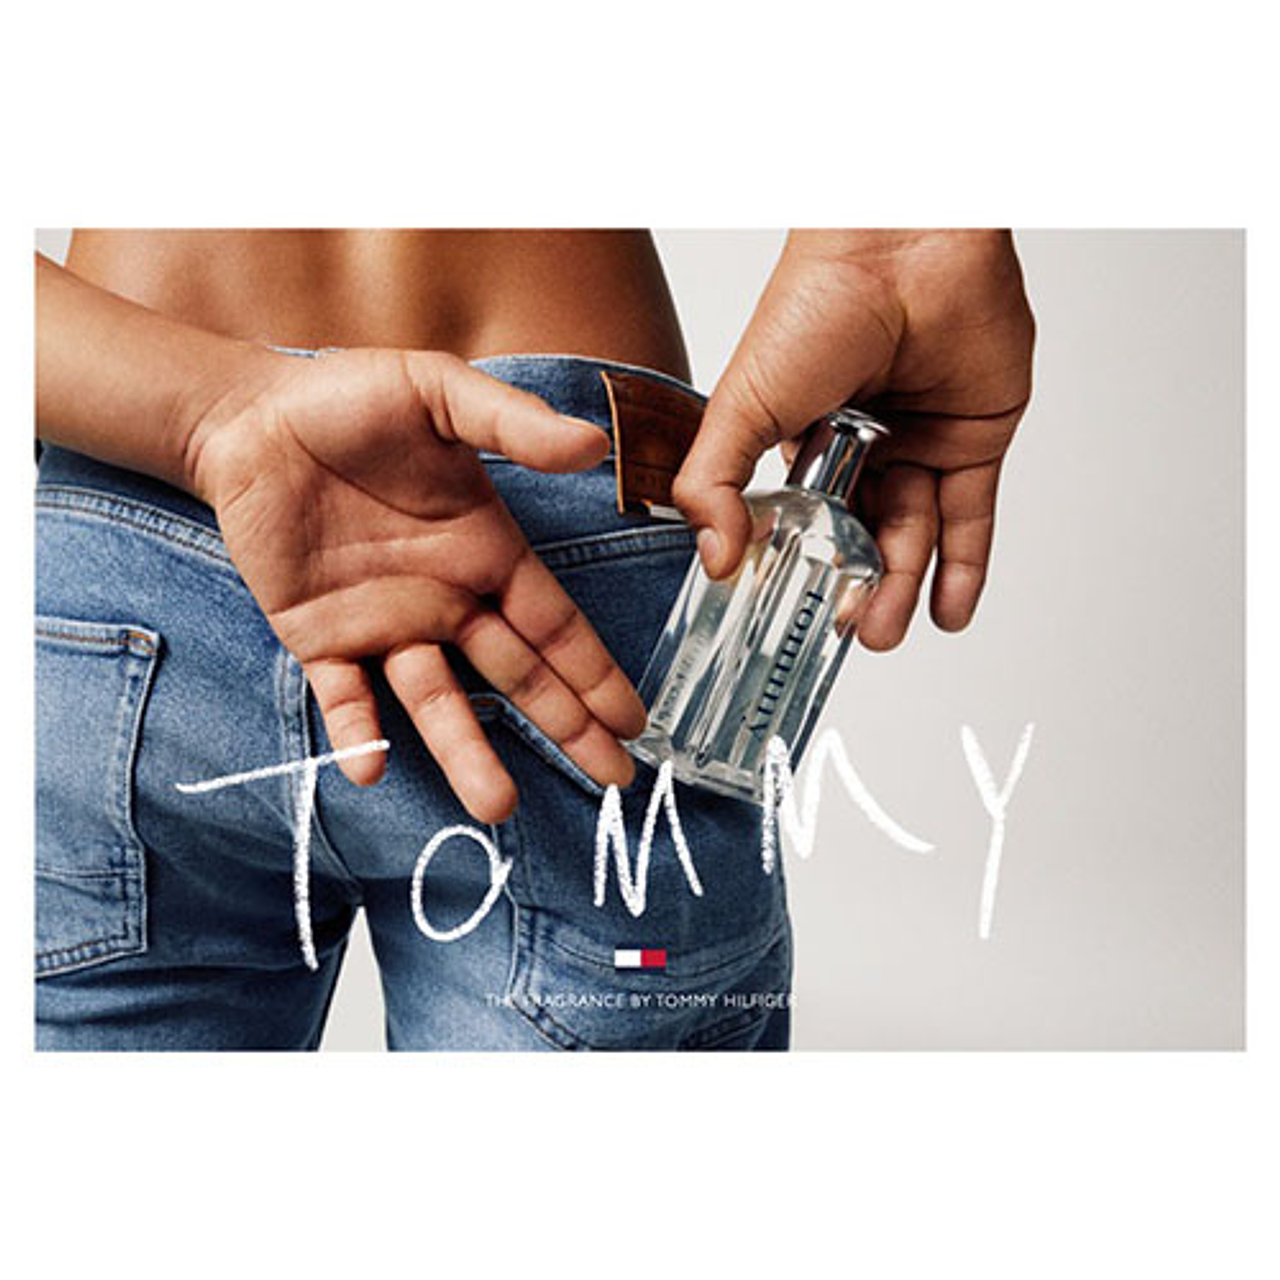 PERFUME HOMBRE IND TOMMY HILFIGER 50ML